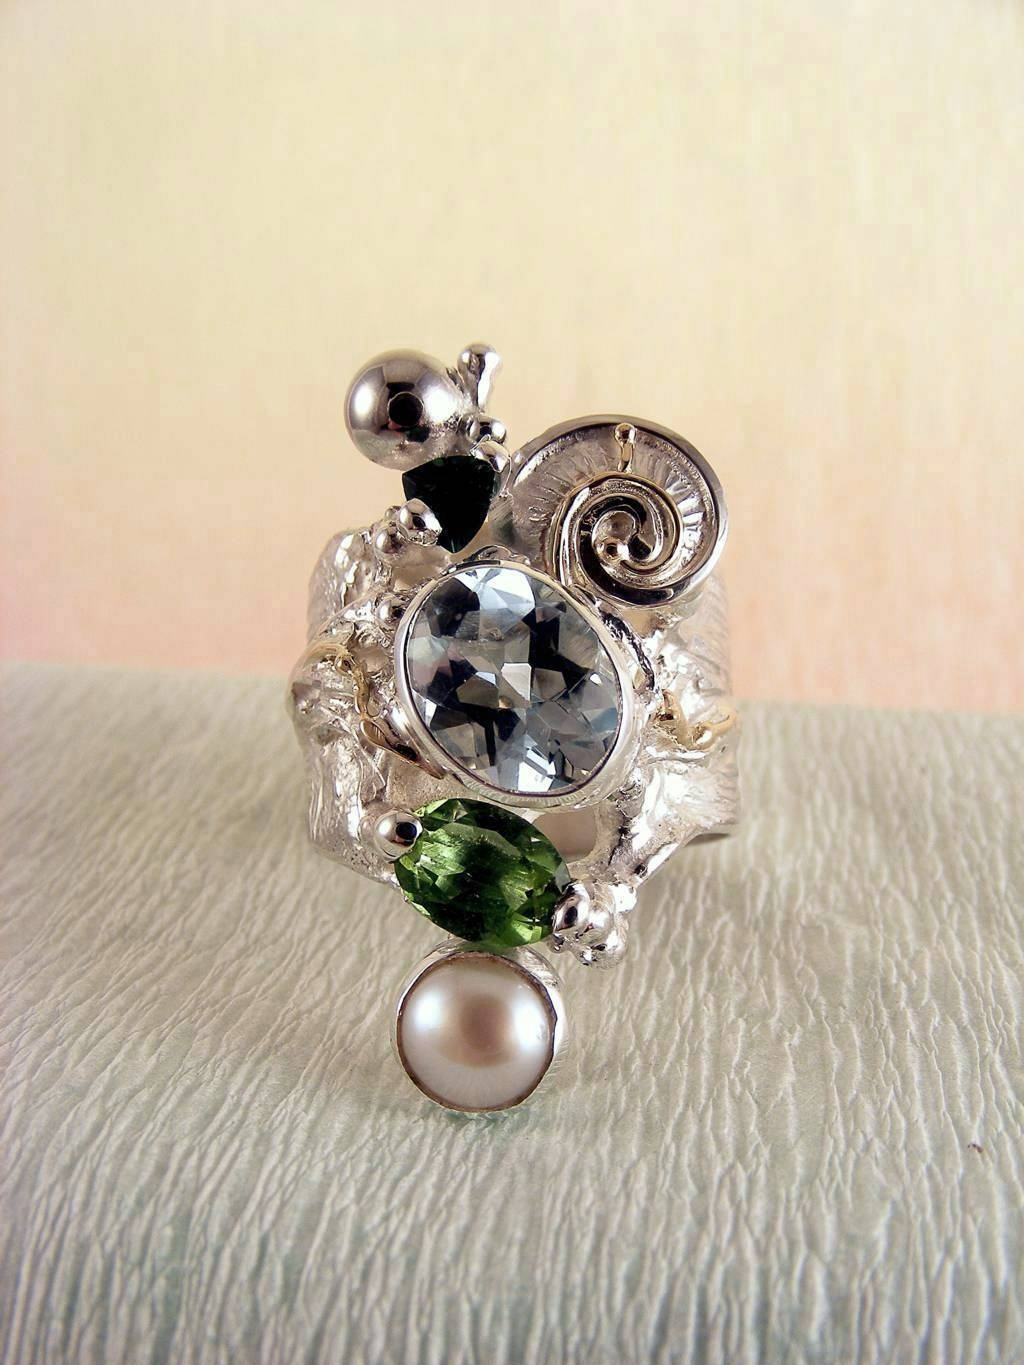 gregory pyra piro art jewellery, silver and gold jewellery with gemstones, gold and silver jewellery with gemstones and pearls, Band #Ring 1441